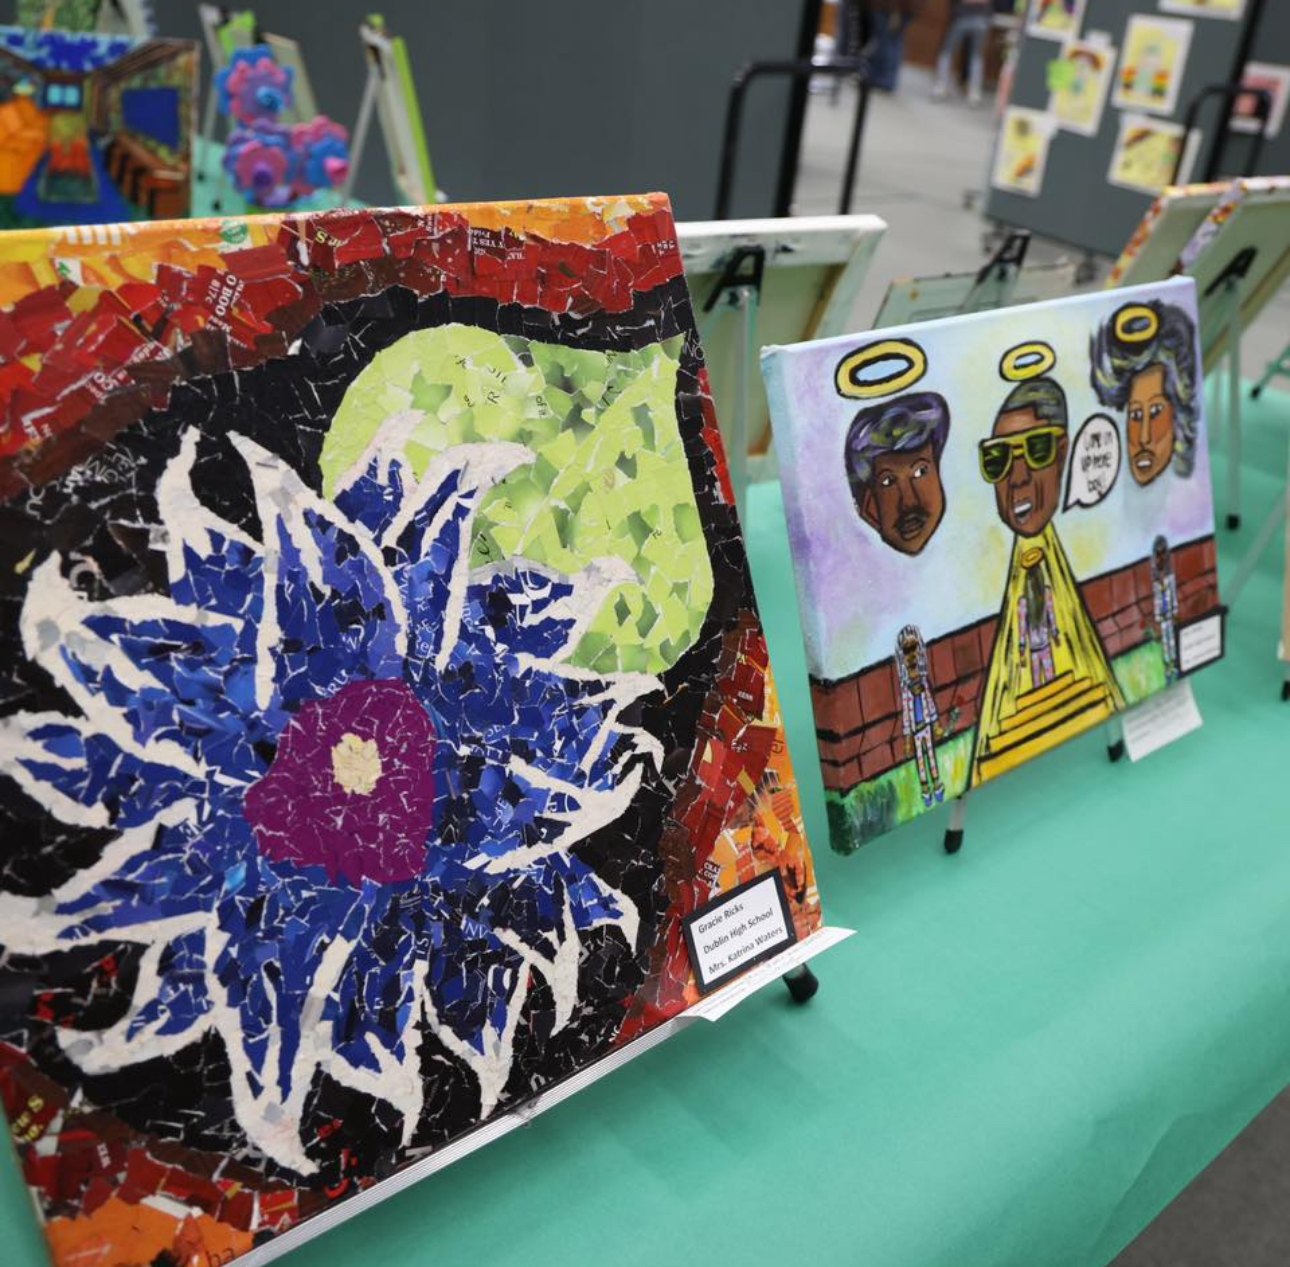 A painting of a spiky blue and purple flower with a large leaf and a painting of three faces with halos are displayed on a table at the St. Patrick's Student Art Show.